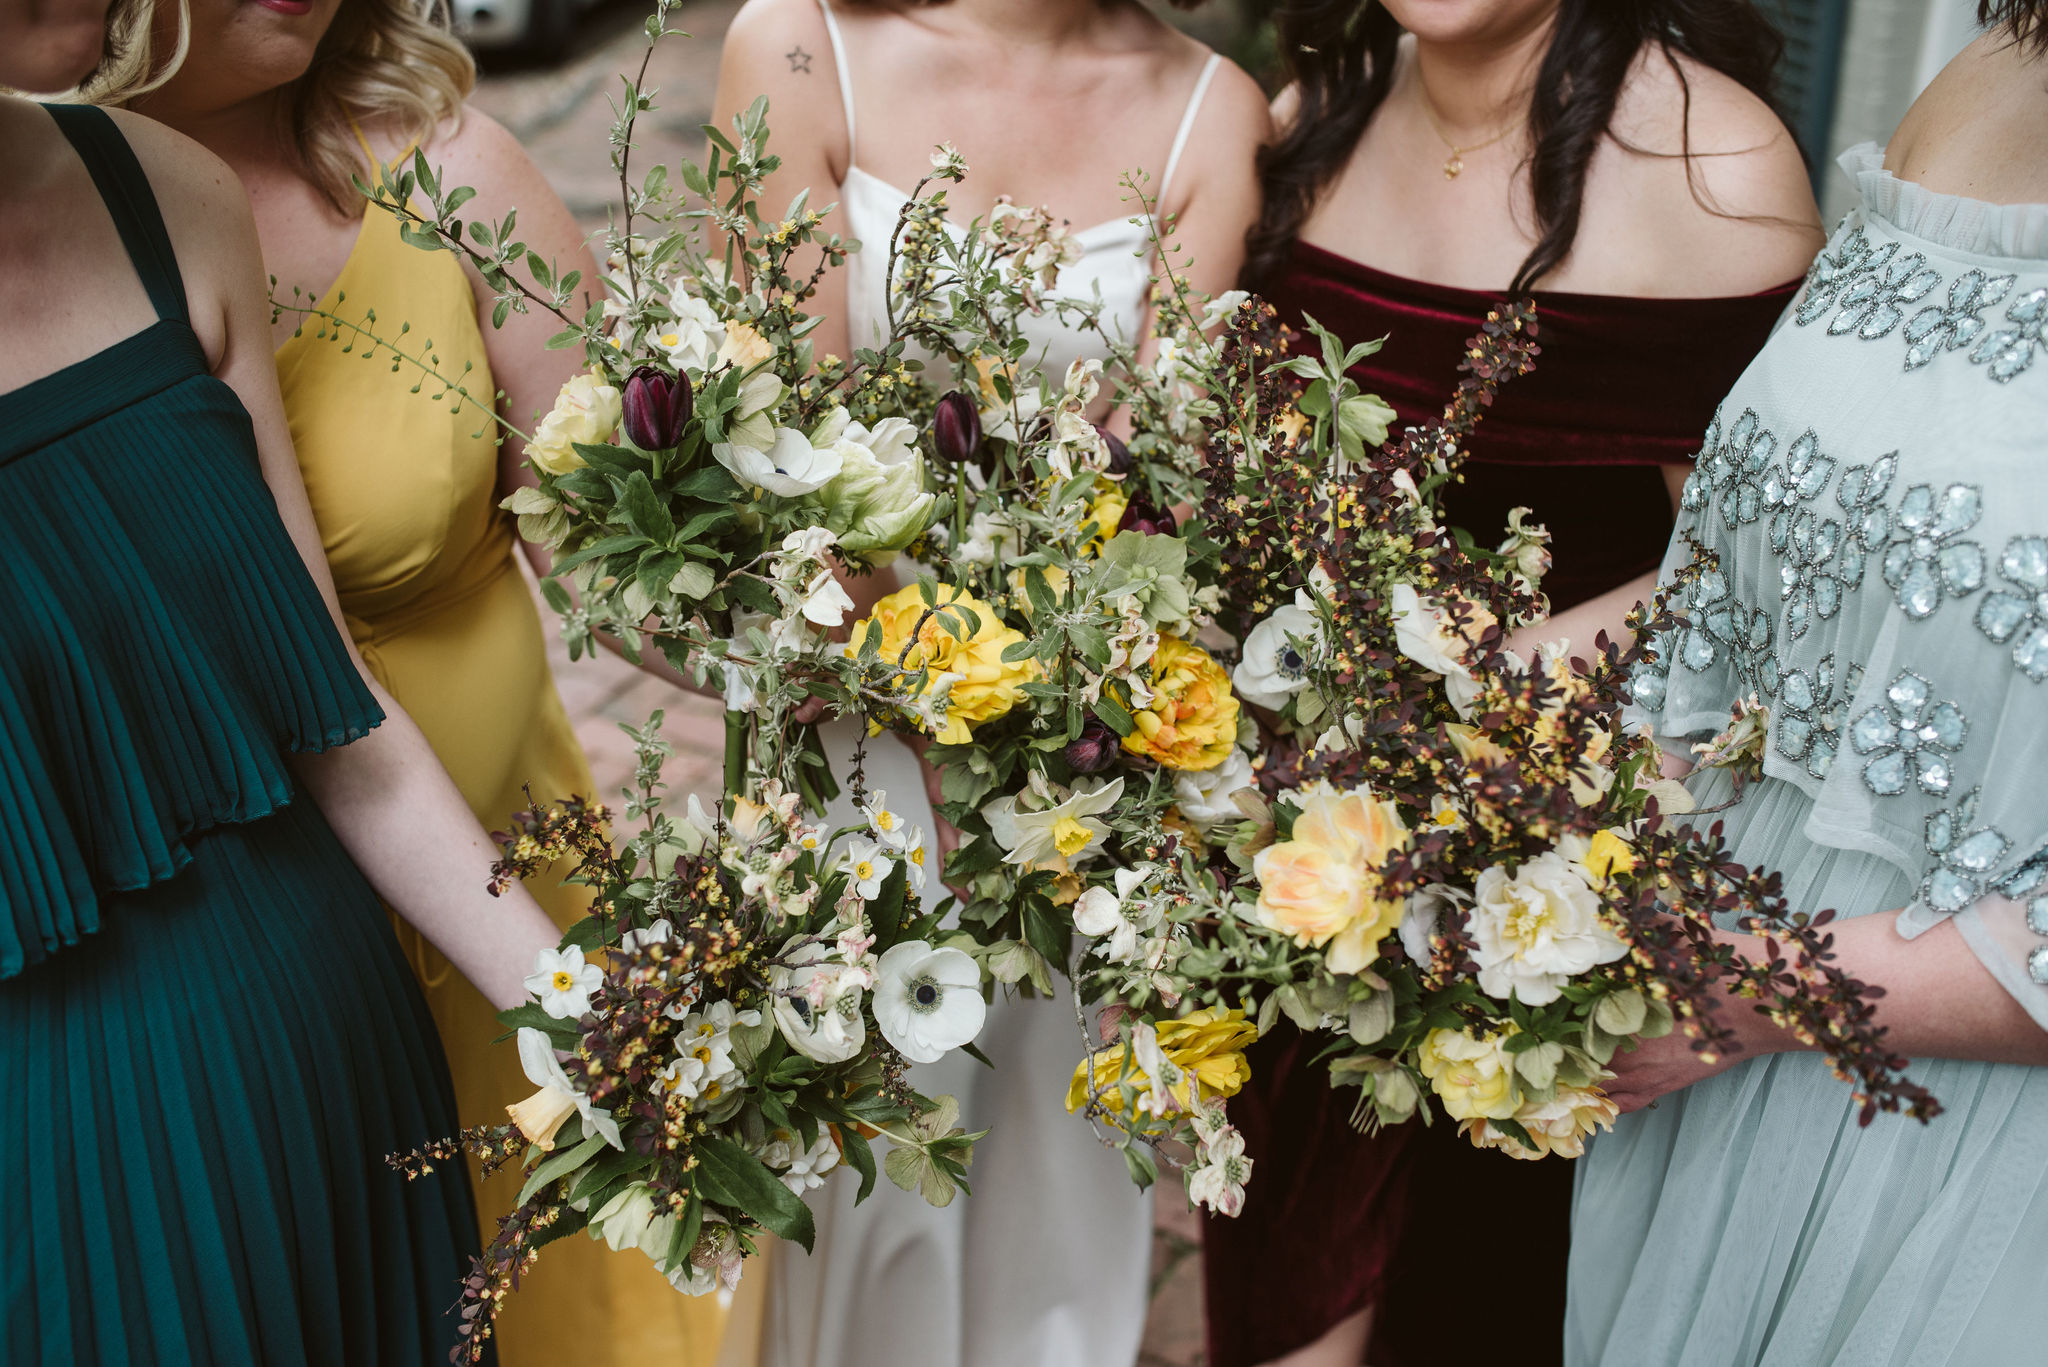  Washington DC, Baltimore Wedding Photographer, Alexandria, Old Town, Jewel Tone, Romantic, Modern, Bridesmaids holding bouquets, Natural arrangements of yellow white and purple flowers, Sungold Flower Co 